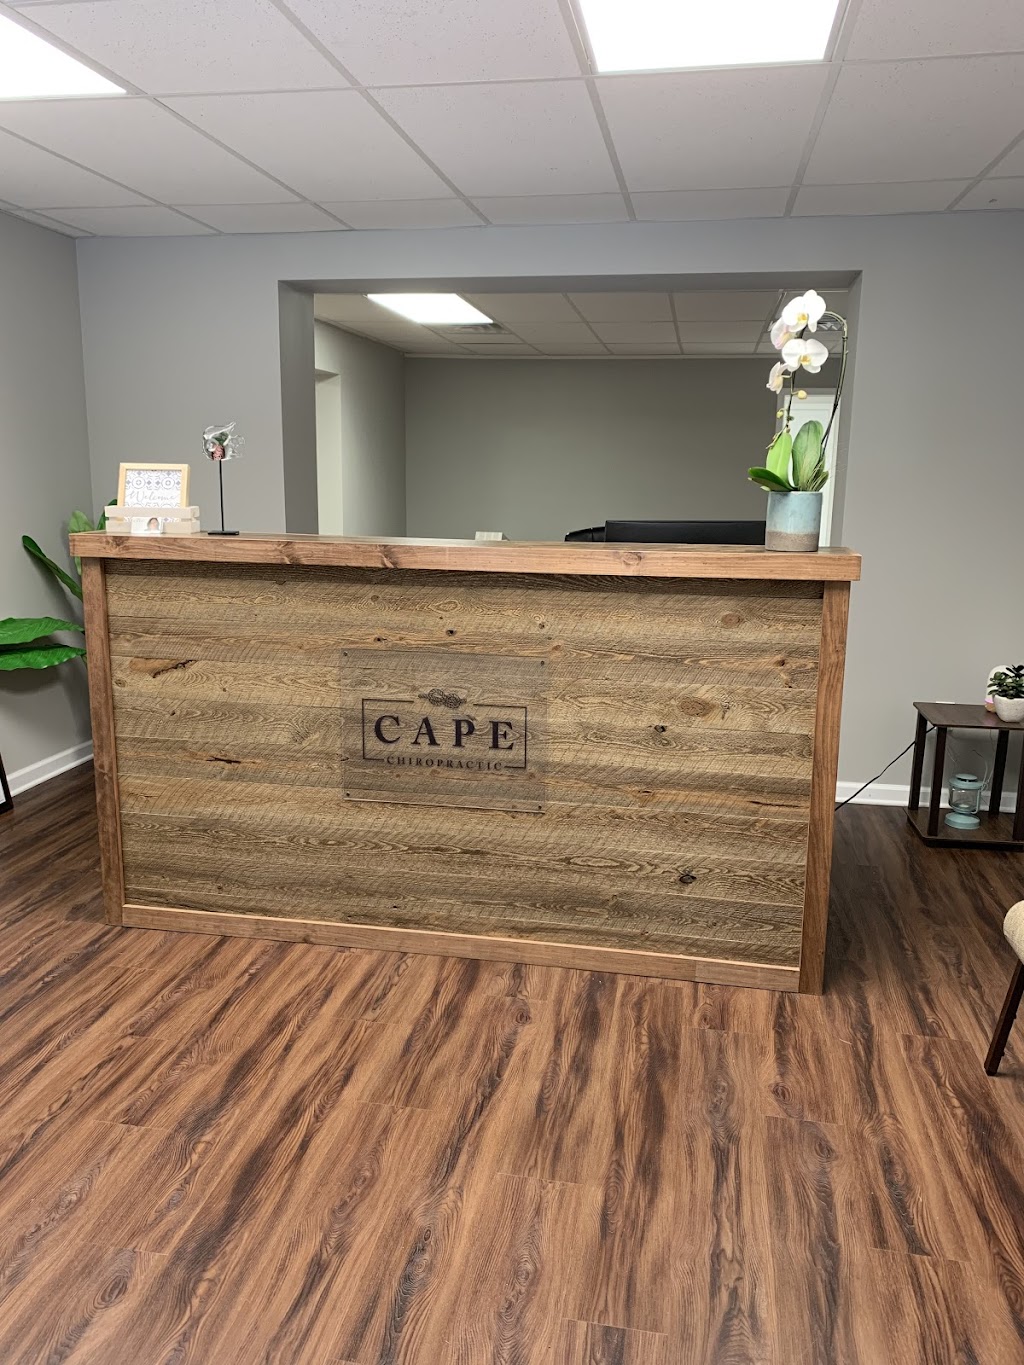 Cape Chiropractic | 2300 US-9 N, Cape May Court House, NJ 08210 | Phone: (609) 478-6808